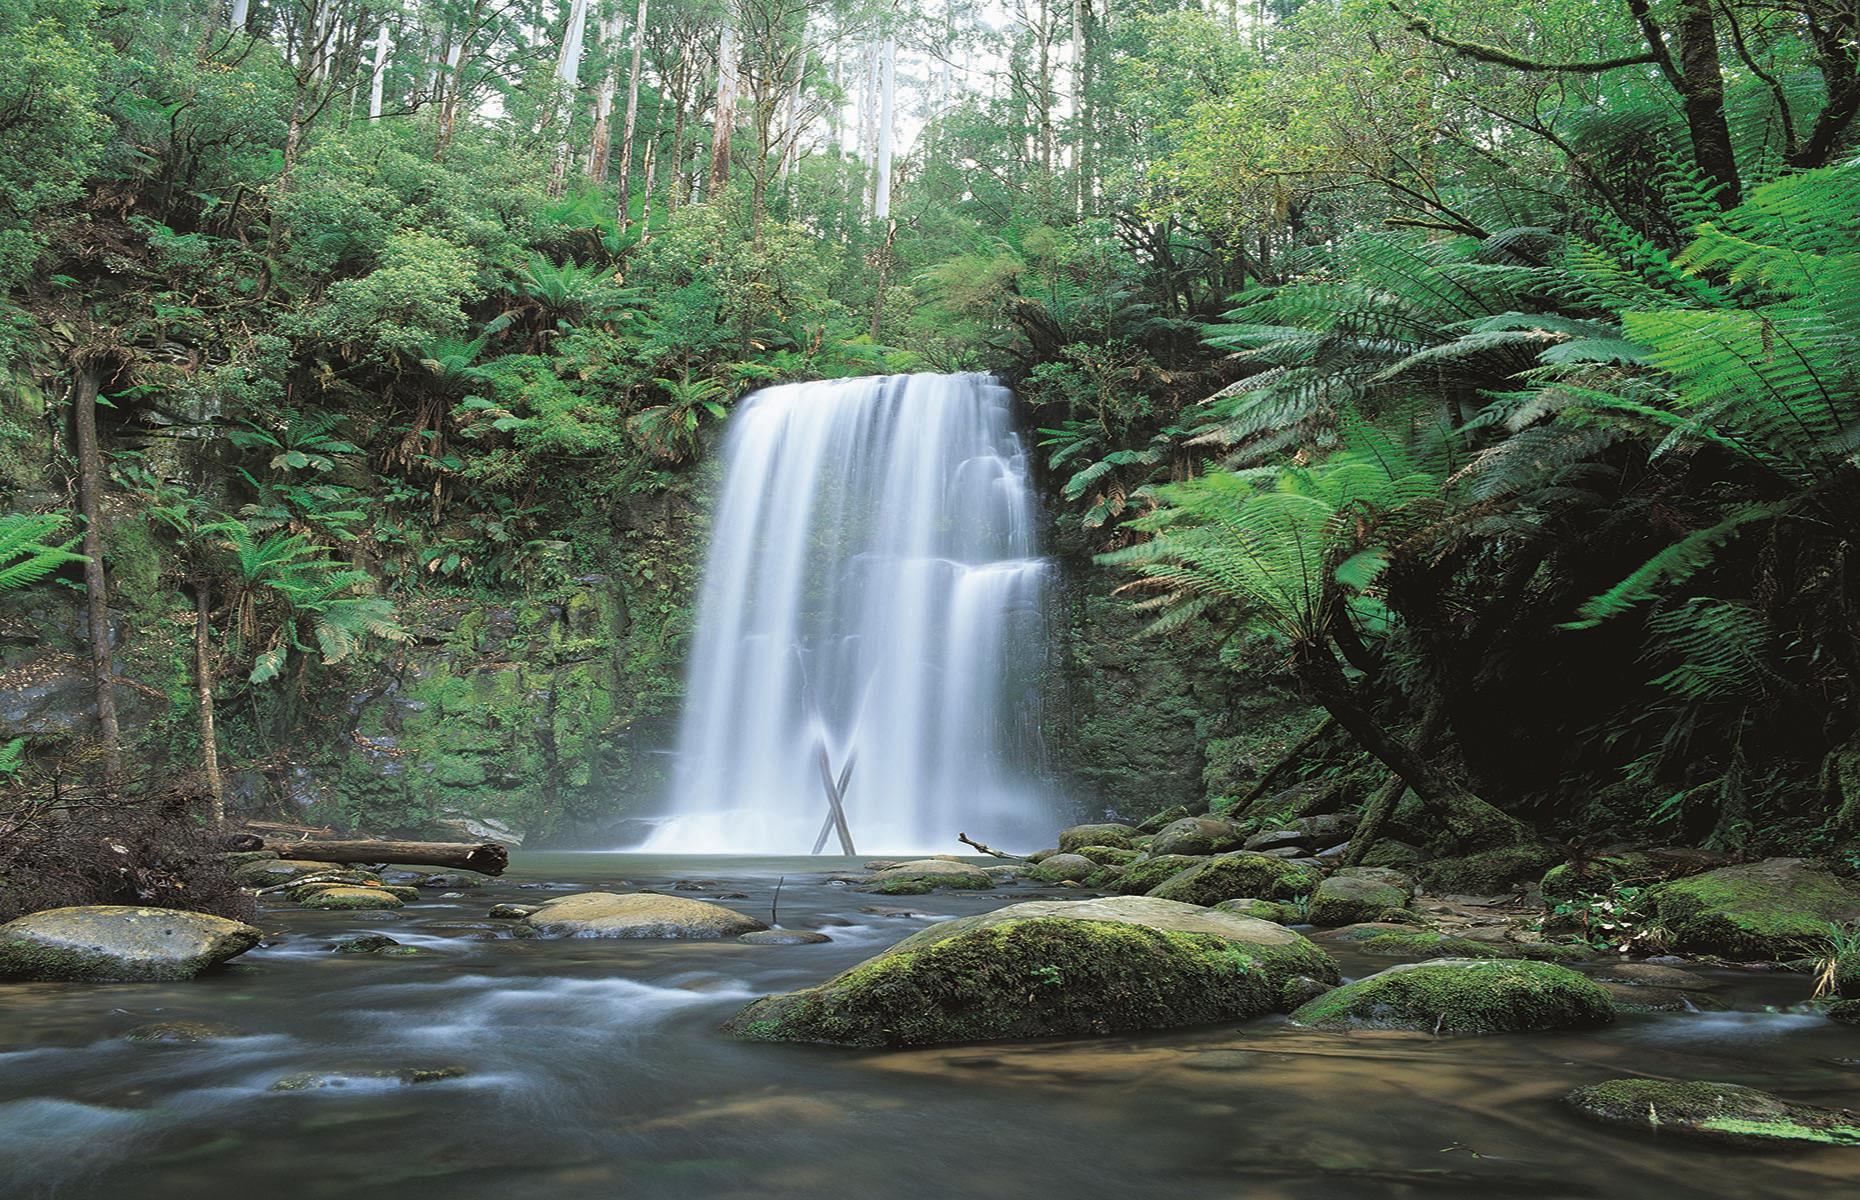 <p>It's not all about the coastline. With its gigantic ferns, towering trees, and cascading waterfalls, Great Otway National Park is an enchanting place to explore on the drive. Here you’ll find koalas, wallabies, and even glow worms at Melba Gully, a lush temperate rainforest.</p>  <p>If you’re up for a steep but rewarding hike, walk the 1.8 miles to Beauchamp Falls, a lesser-known 65-foot watery drop that's tucked away in the forest.</p>